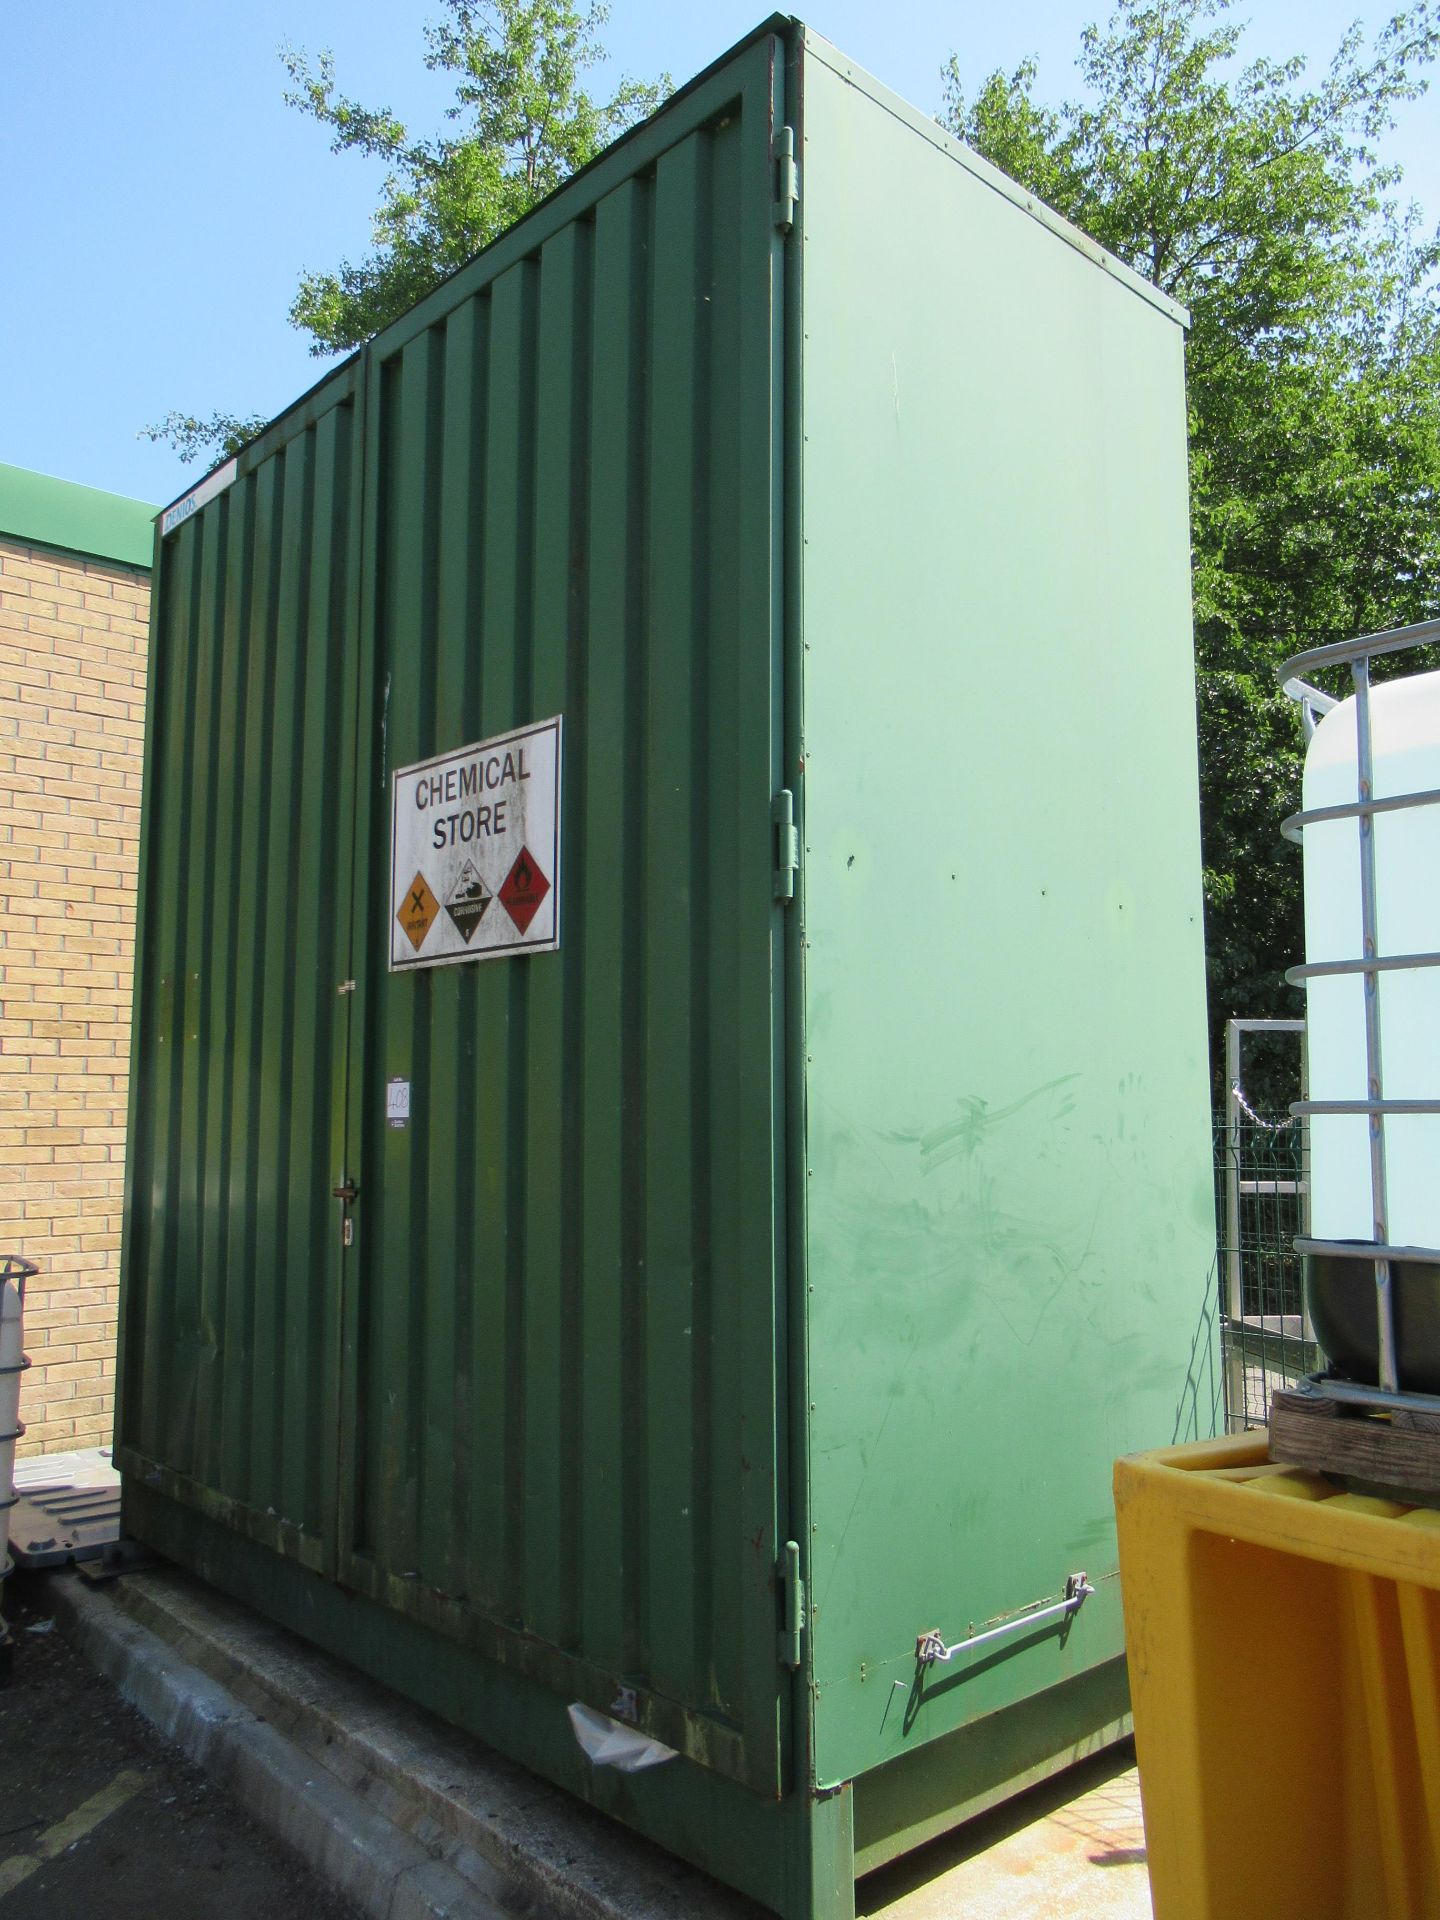 Denios steel chemical storage container external dimensions 3120mm wide x 1480mm deep x 3500mm high - Image 2 of 4